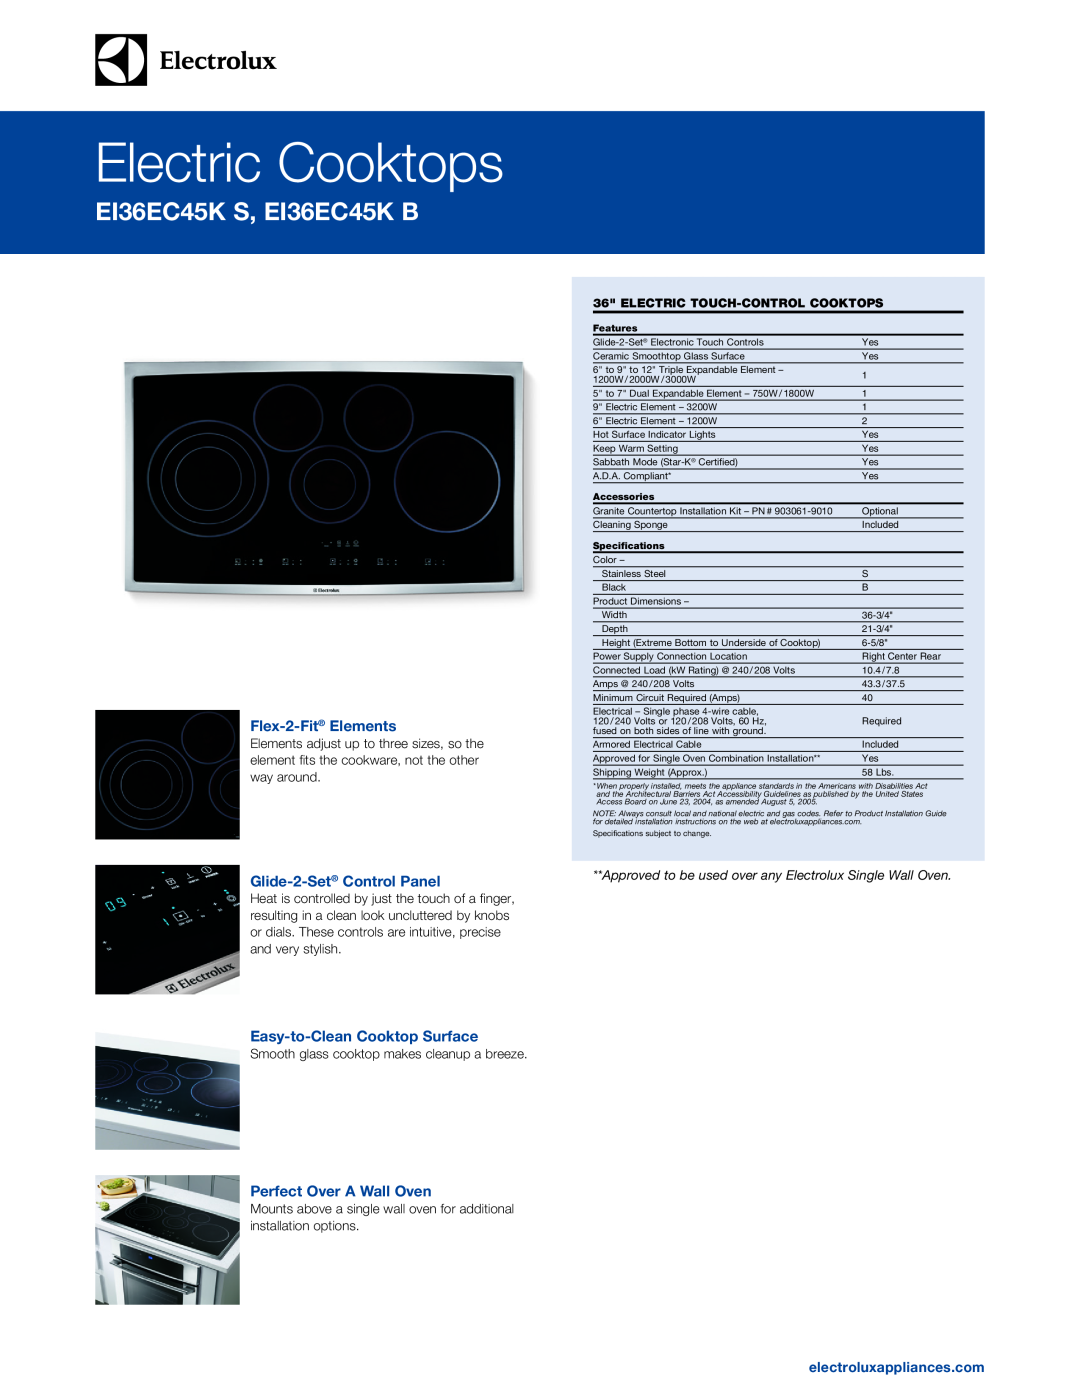 Electrolux EI36EC45K S specifications Flex-2-Fit Elements, Glide-2-Set Control Panel, Easy-to-Clean Cooktop Surface 